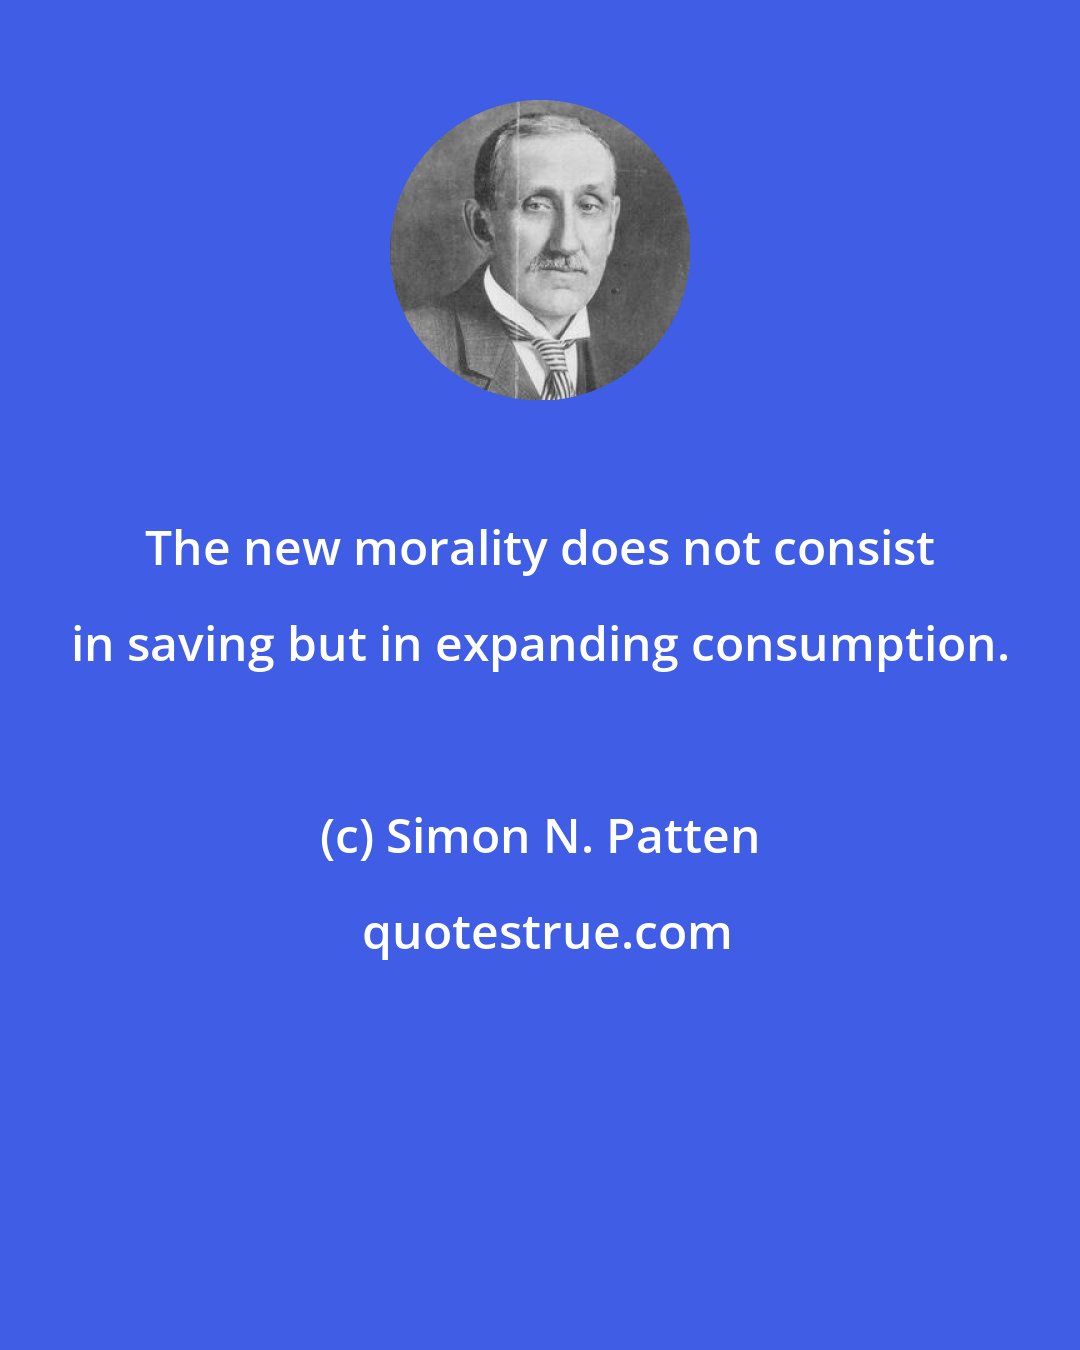 Simon N. Patten: The new morality does not consist in saving but in expanding consumption.